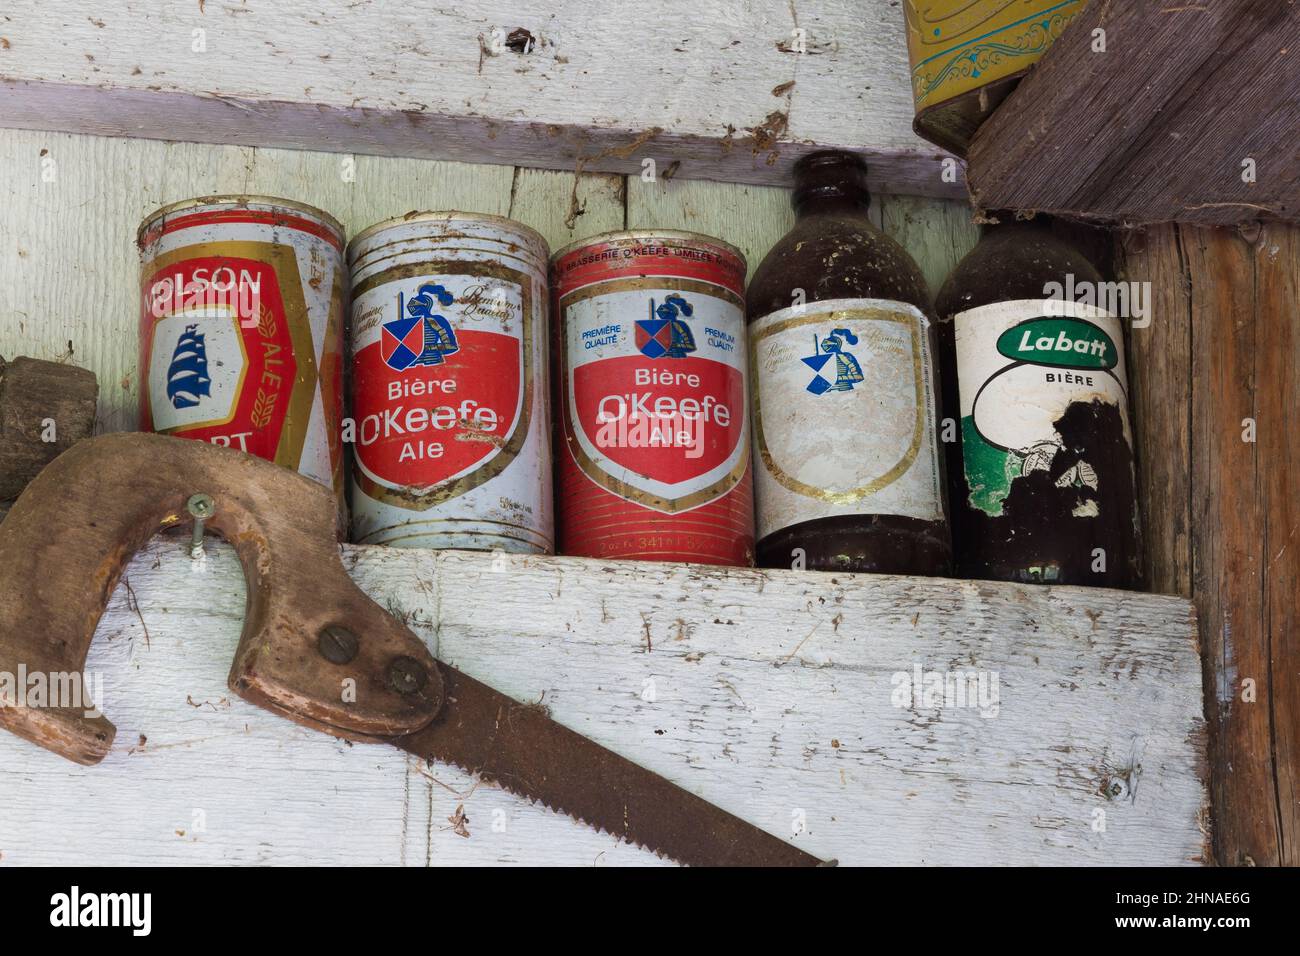 Old saw, beer cans and bottles on shelf inside old rustic wood plank cabin, Quebec. Stock Photo